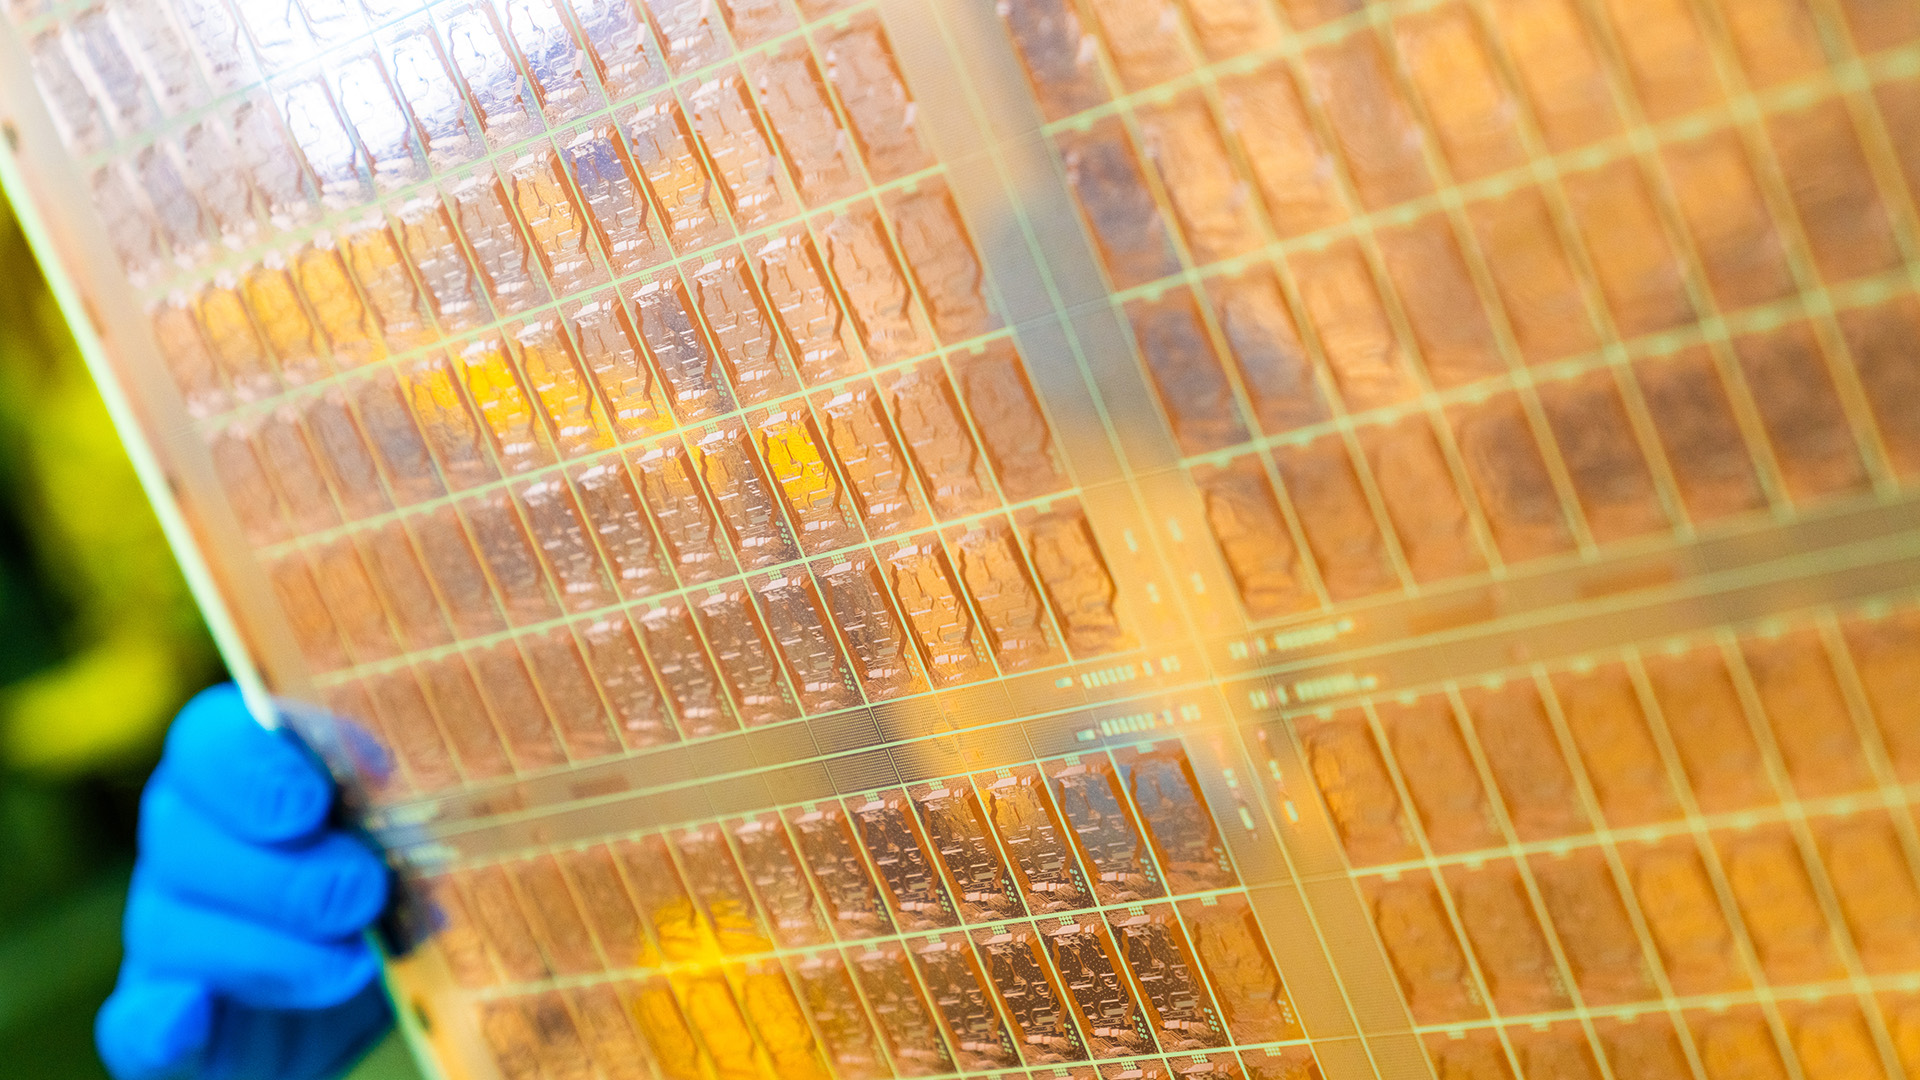  It looks like AMD is racing Intel to production of chips on glass substrates for faster, more efficient processors 